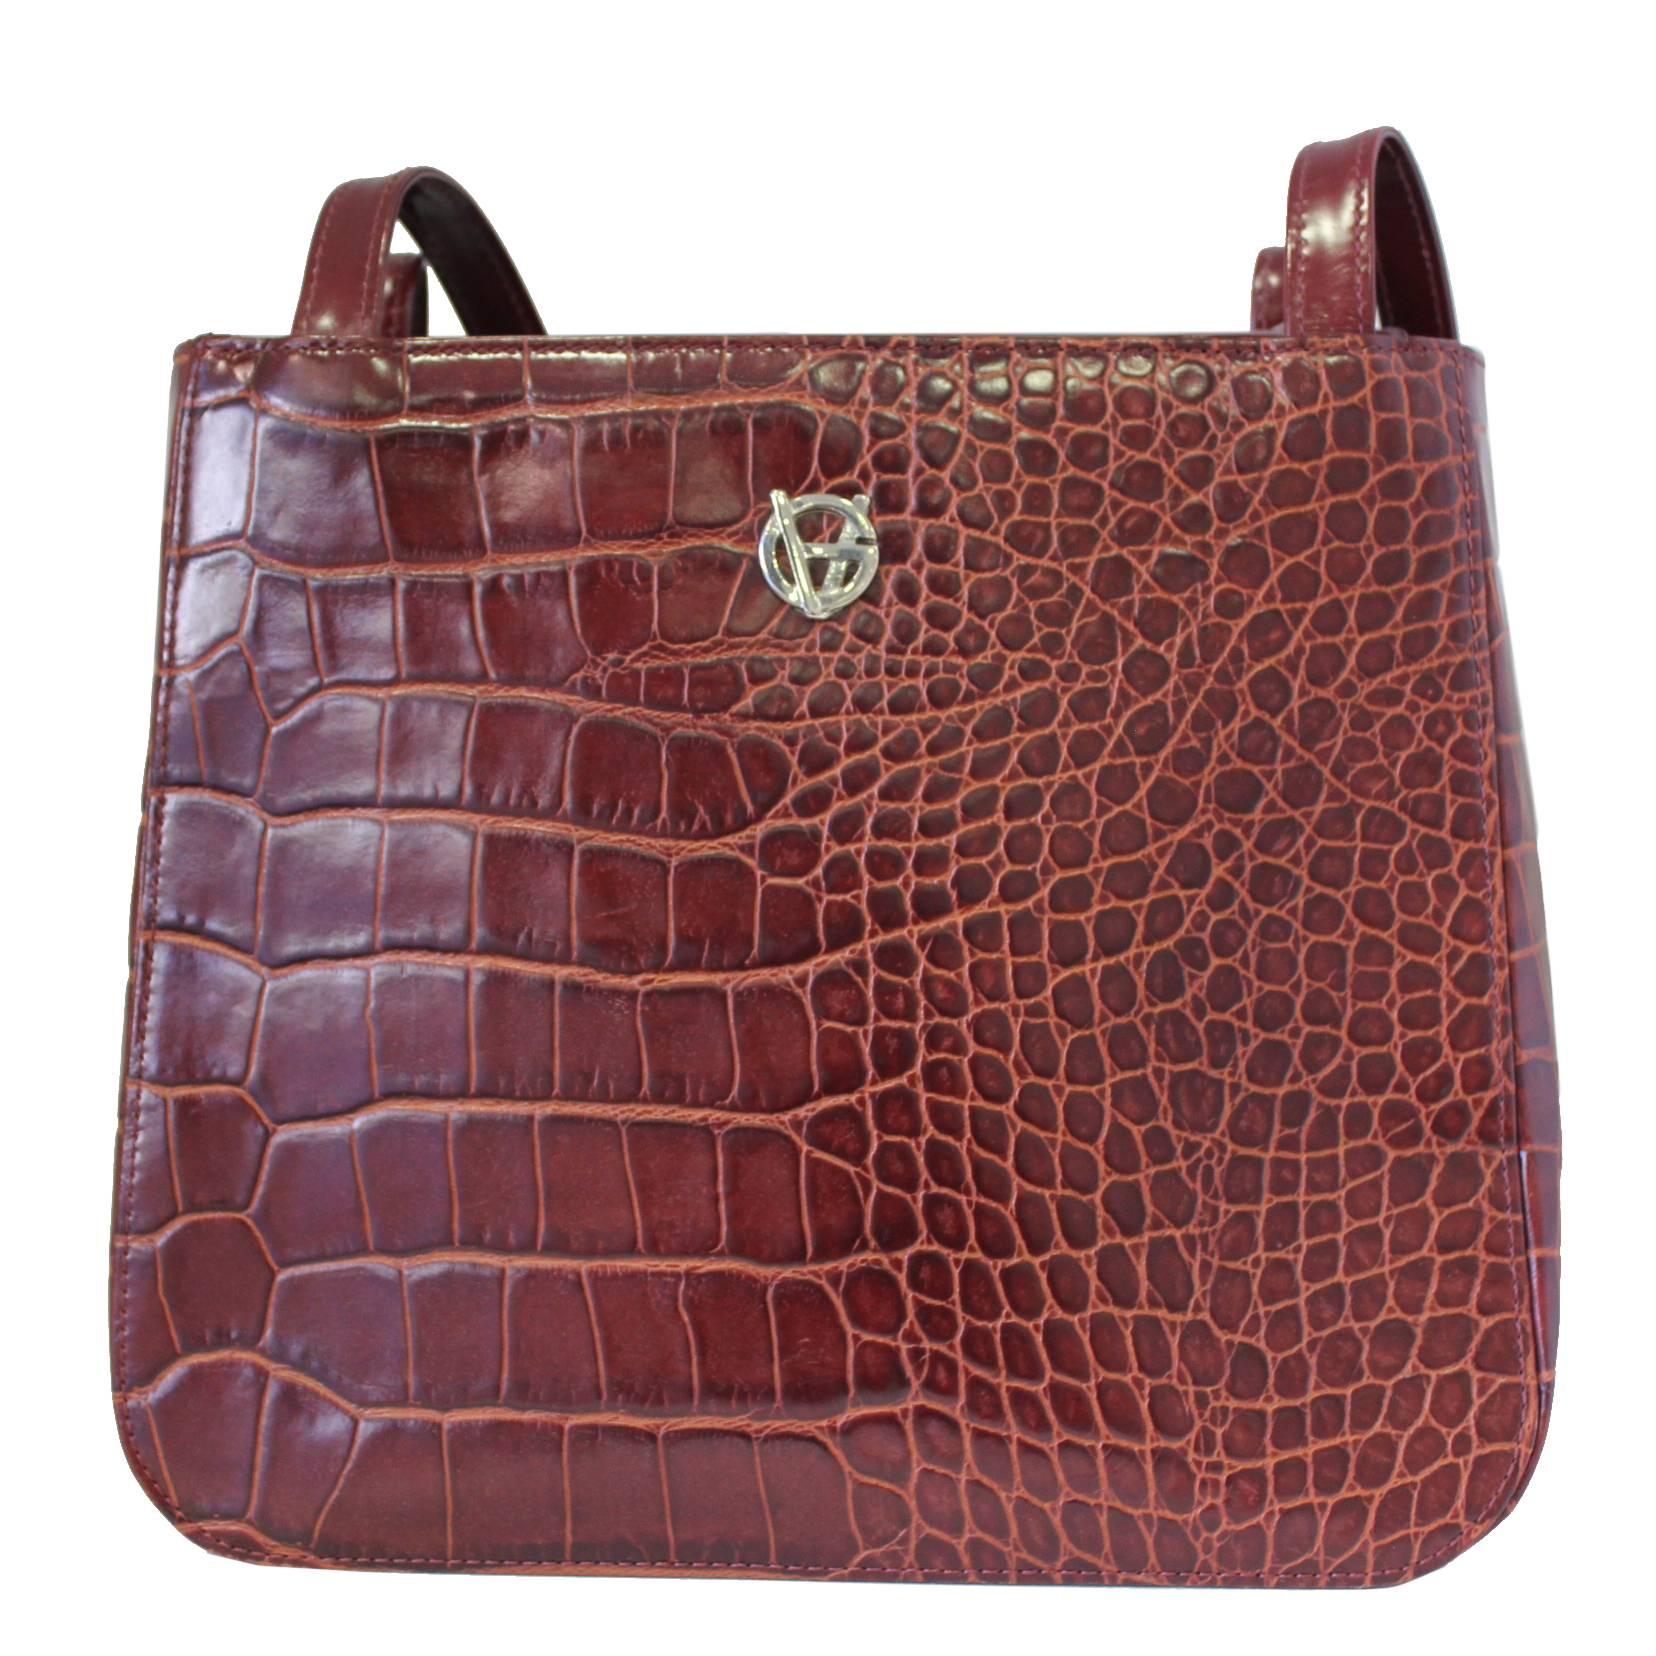 Gianni Versace Croc-Effect Leather Small Shoulder Bag For Sale